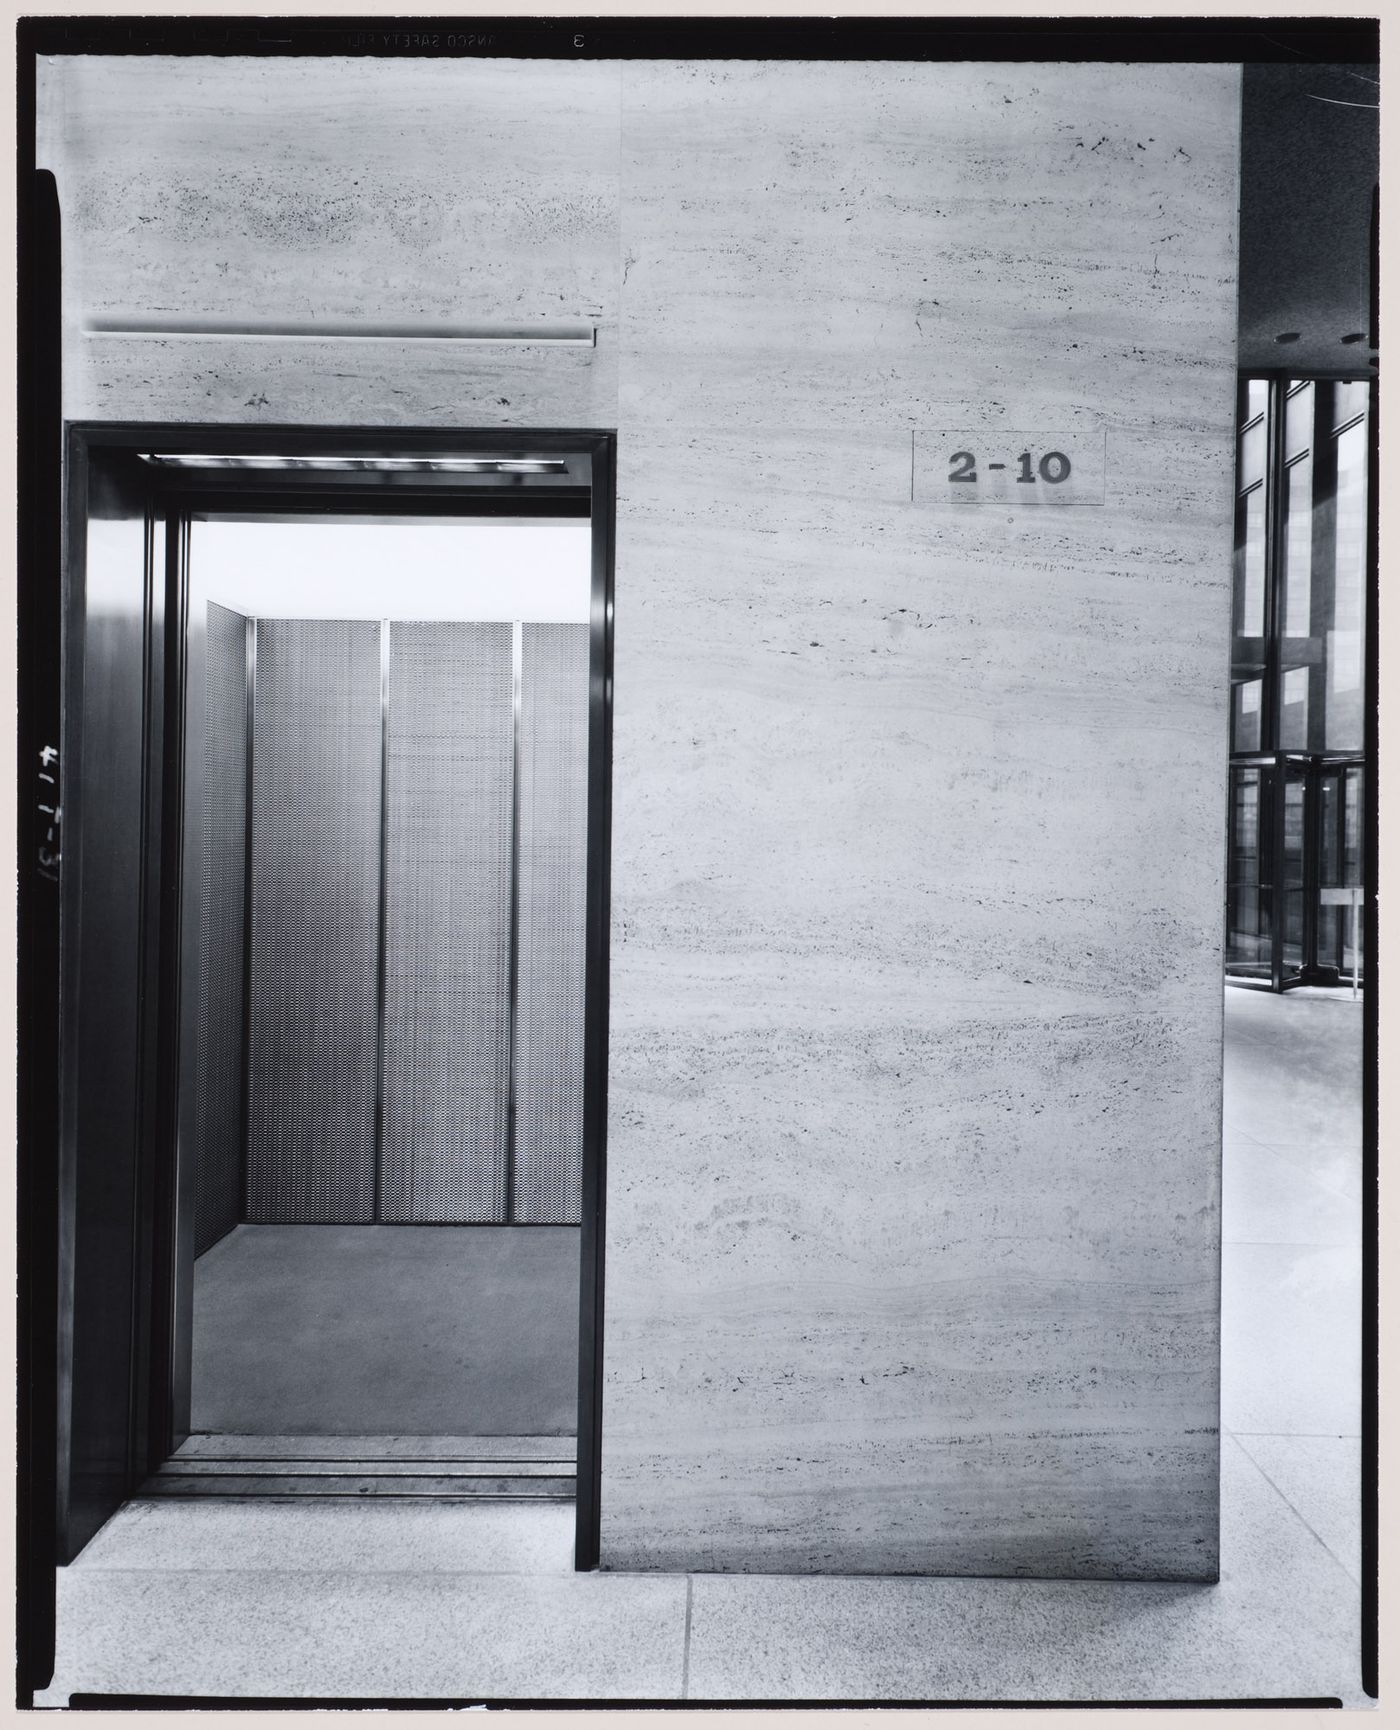 Interior view of the east lobby of the Seagram Building showing an elevator designed by Philip Johnson, New York City